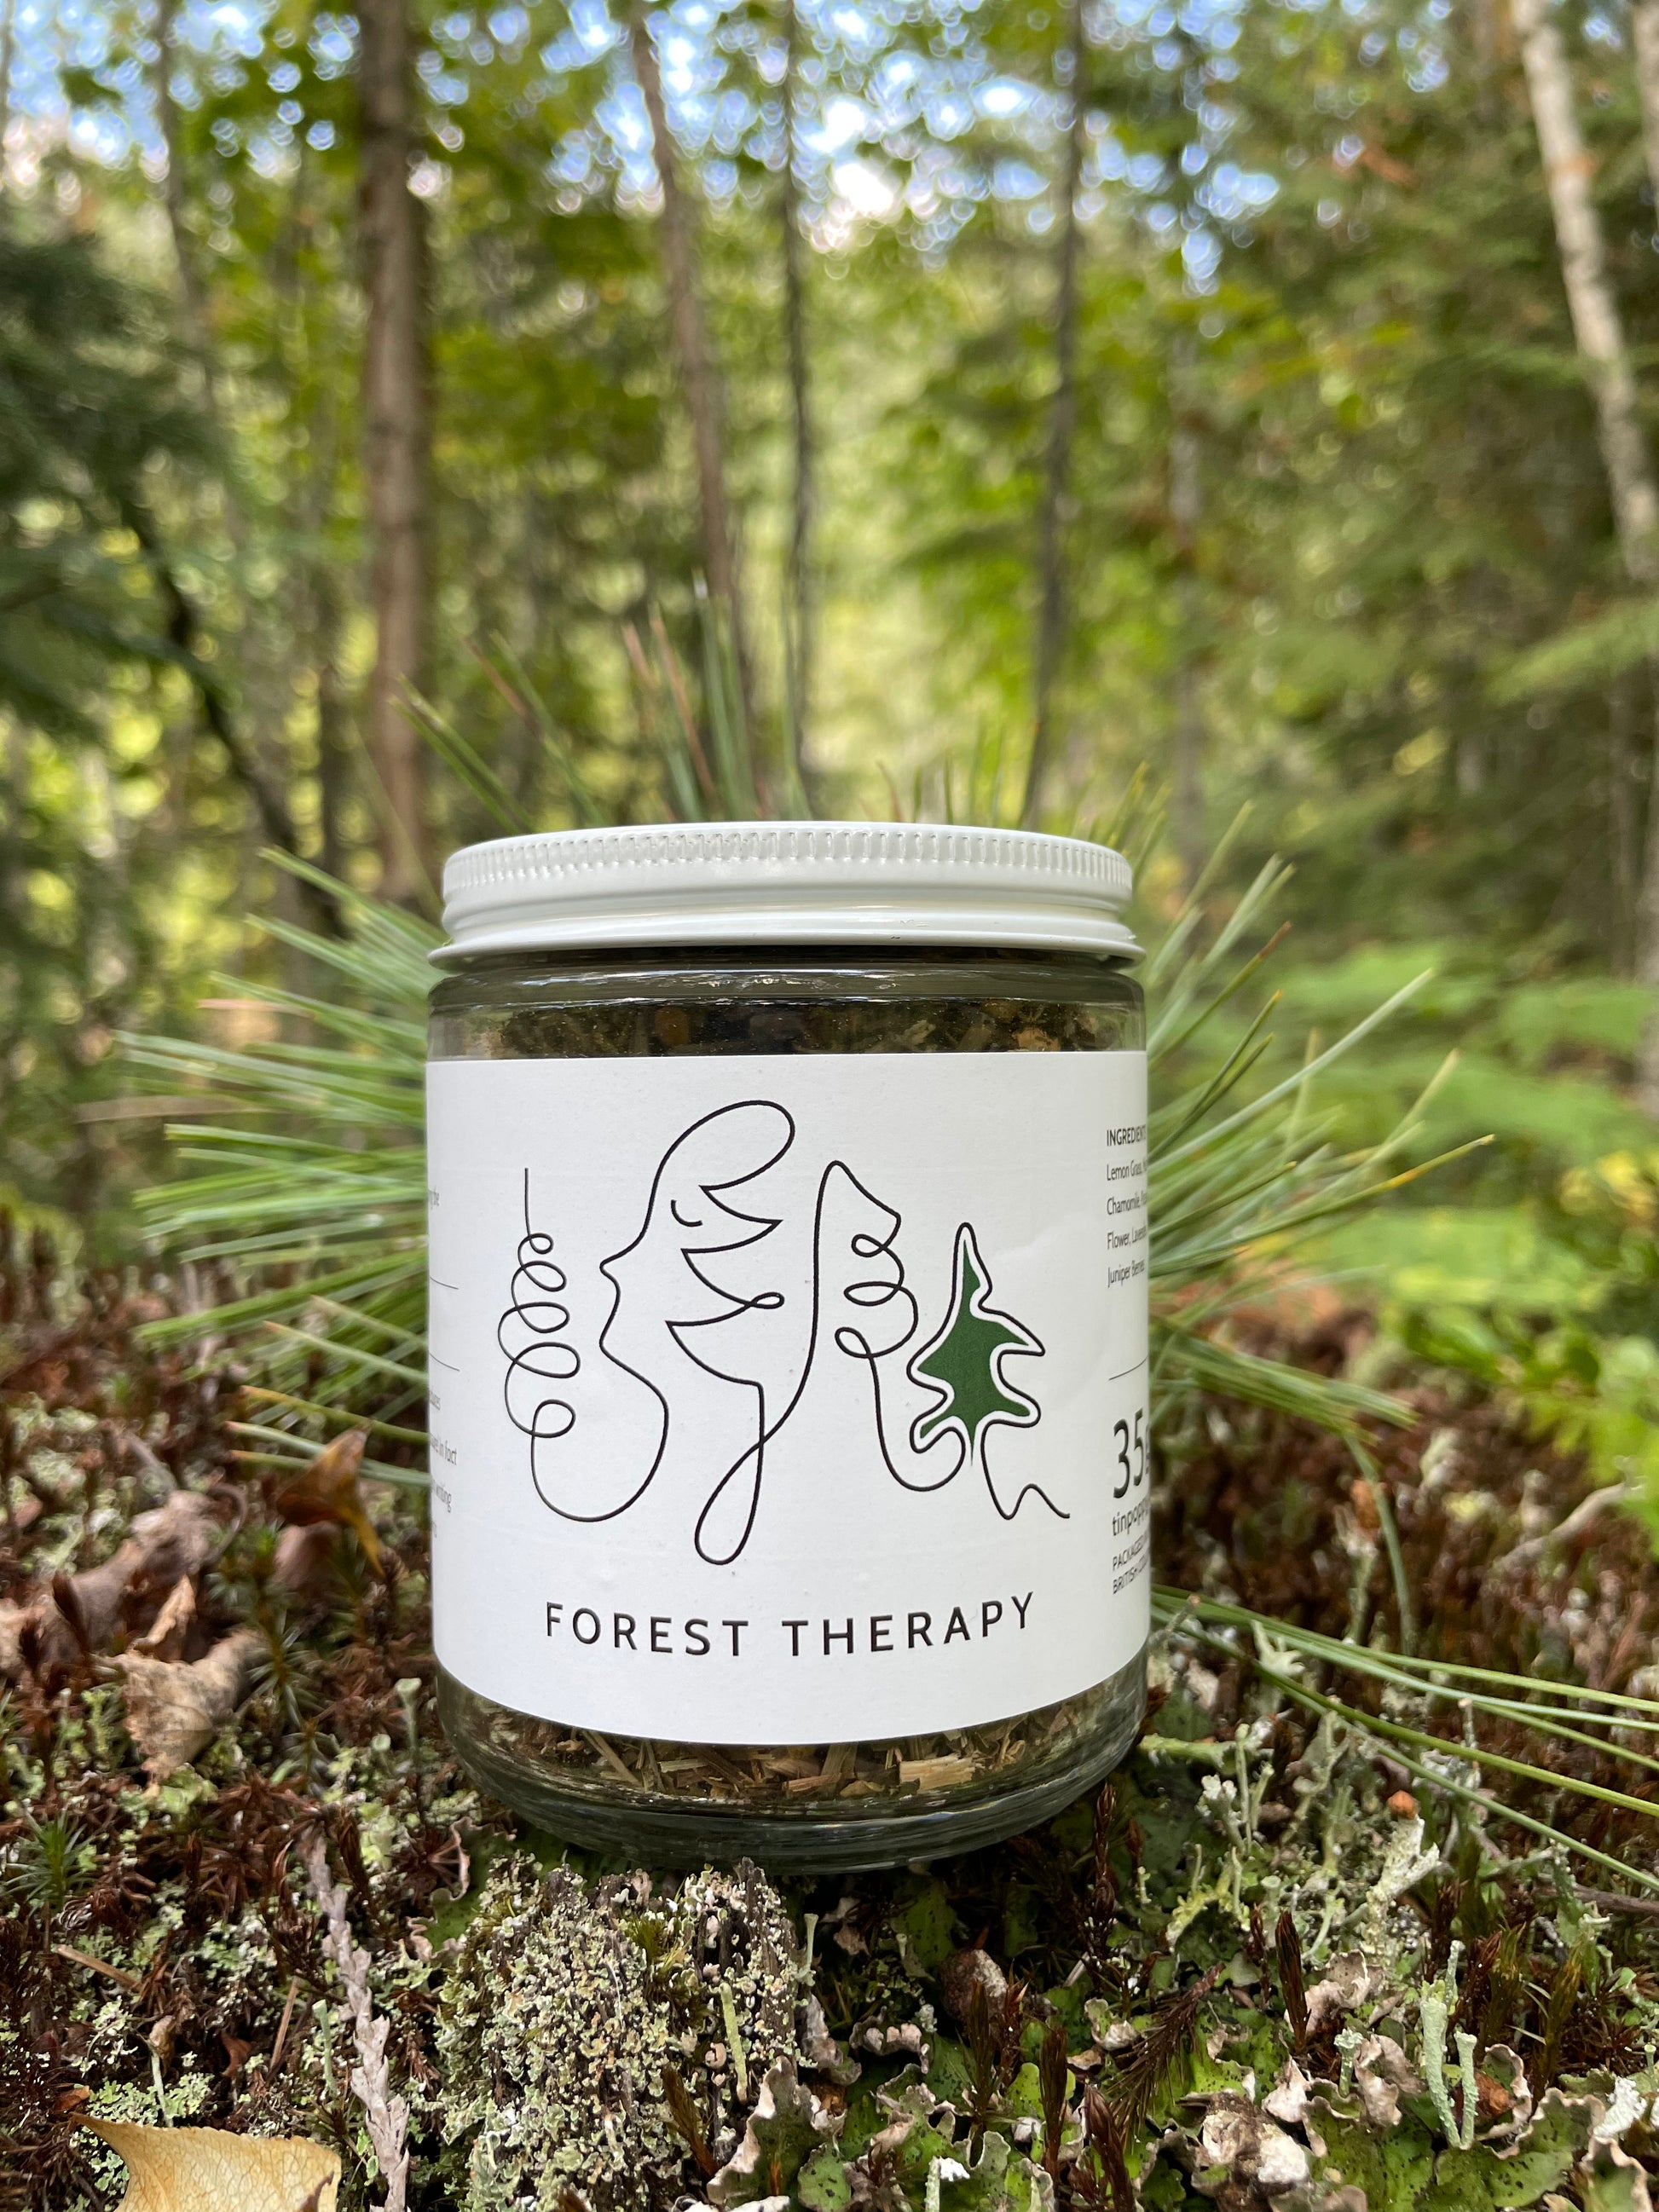 A jar Forest Therapy Tea from Tin Poppy Retreat